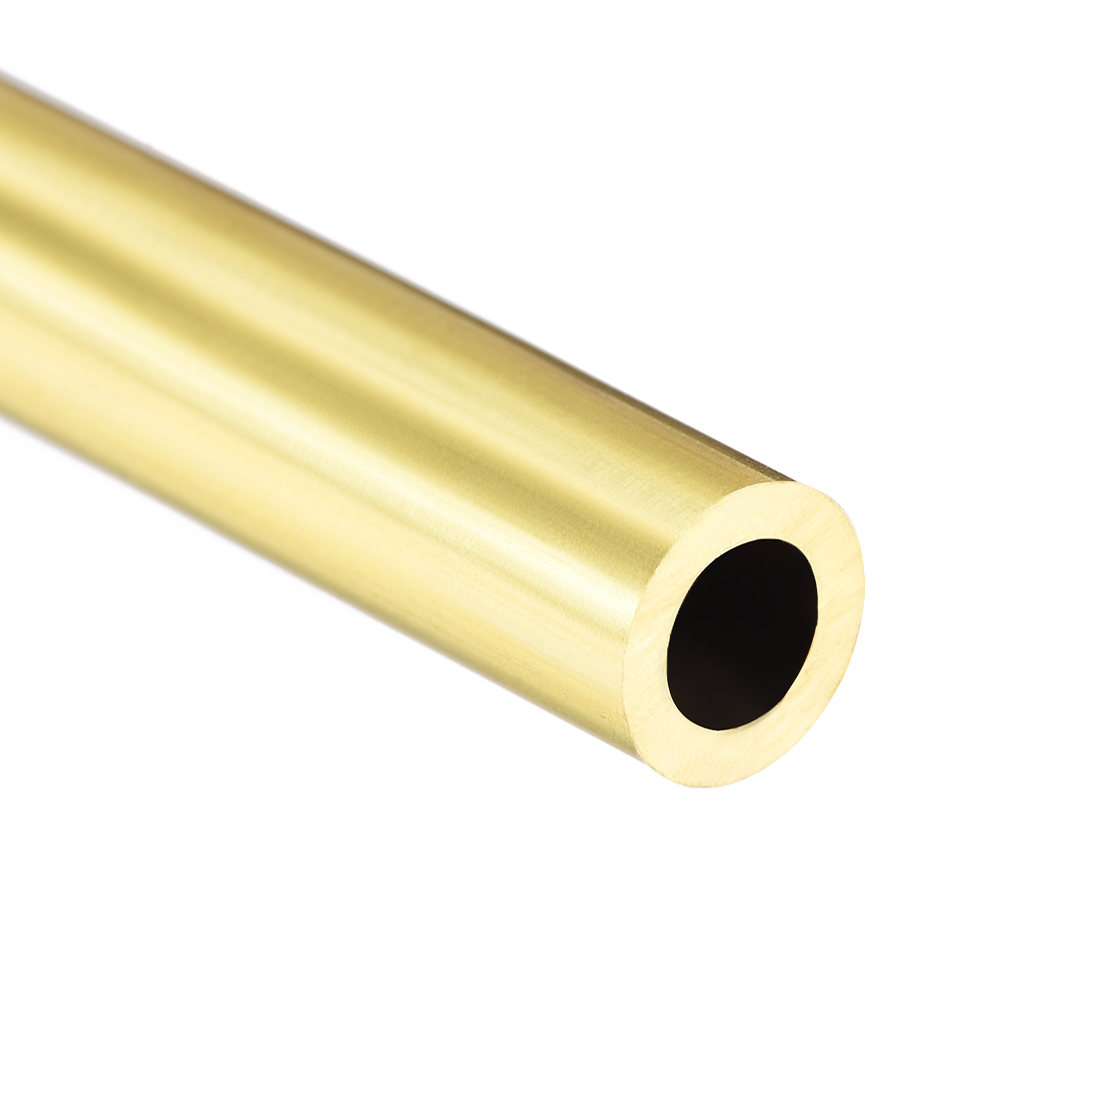 Uxcell 1-3pc Brass Round Tube 5mm/6mm/7mm/8mm/9mm OD 300mm Length 1.5mm Wall Thickness Seamless Straight Pipe Tubing for DIY